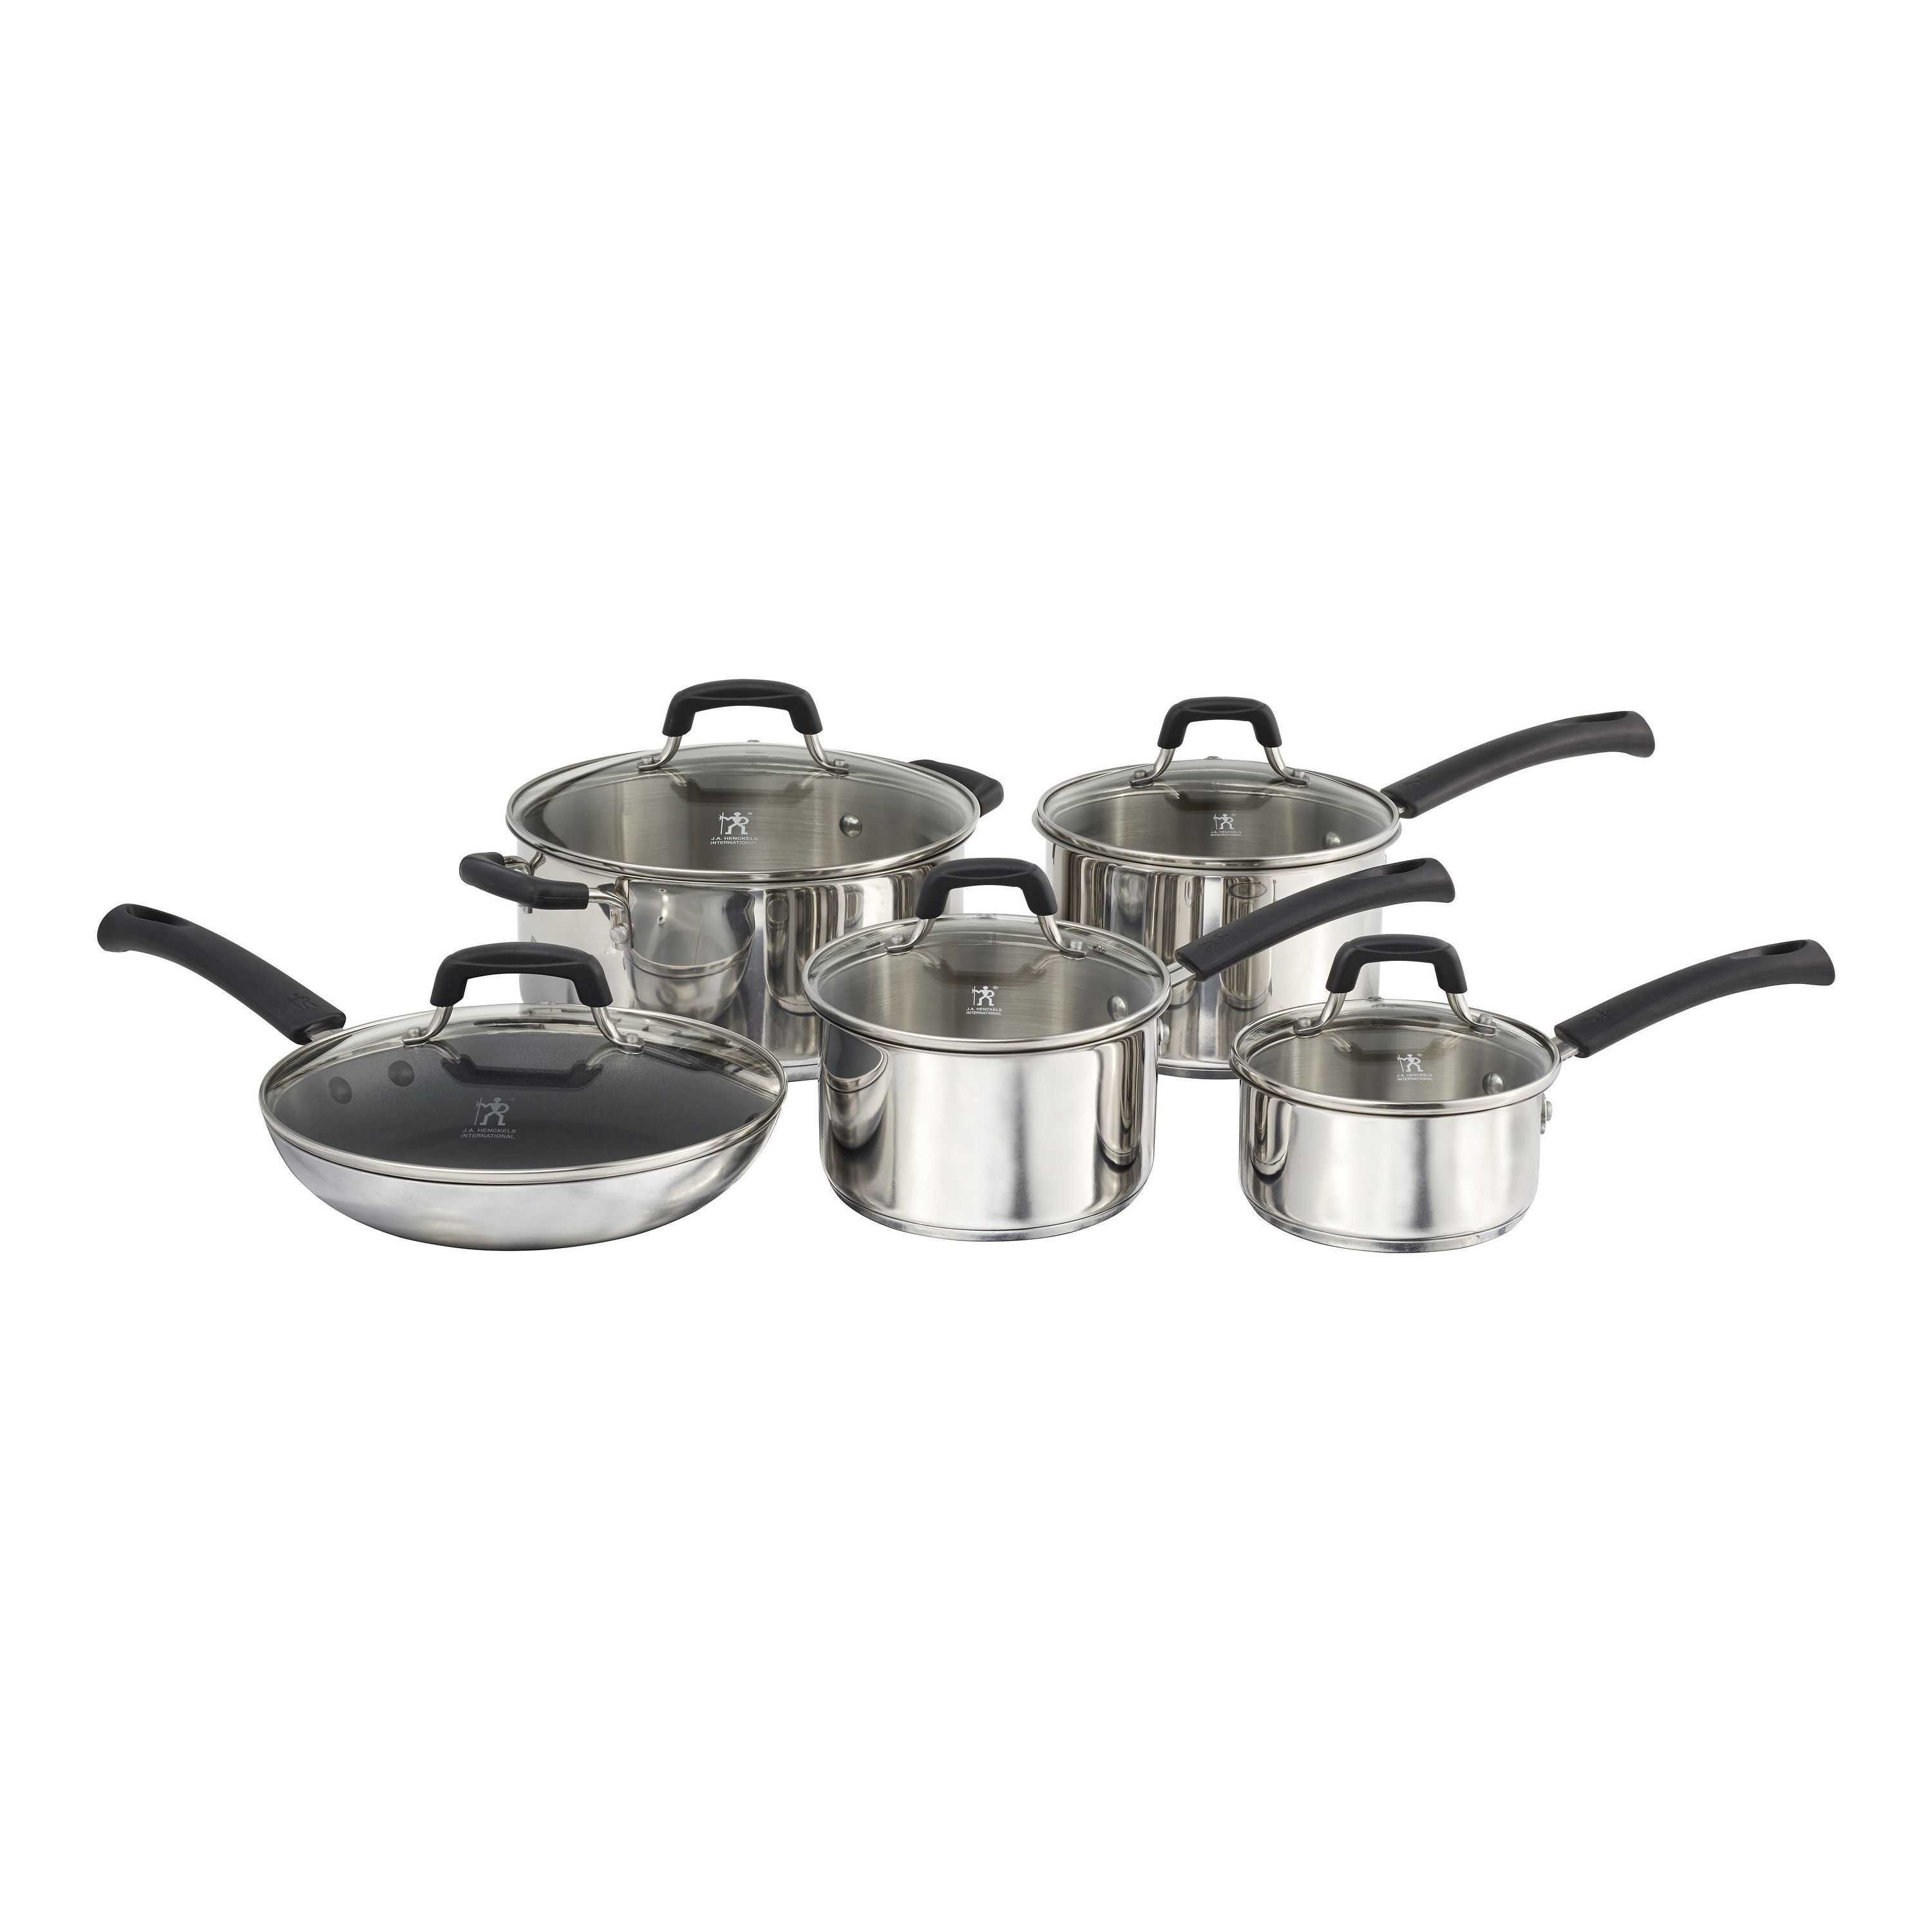 18 10 stainless steel pots